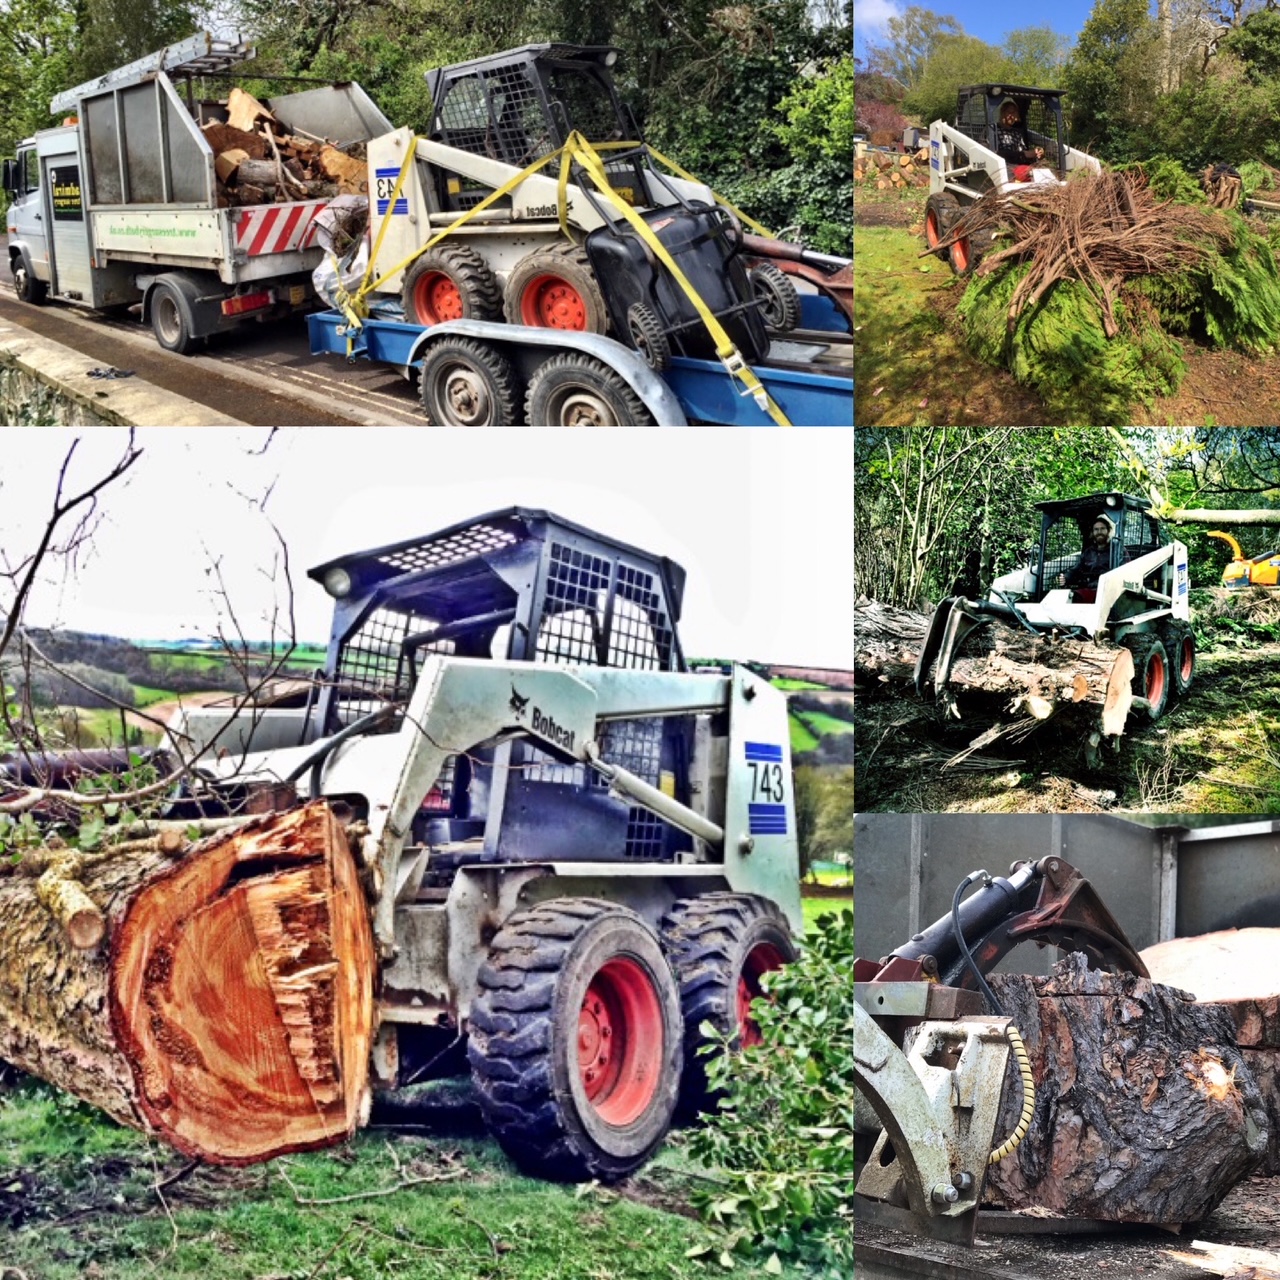 forestry machinery